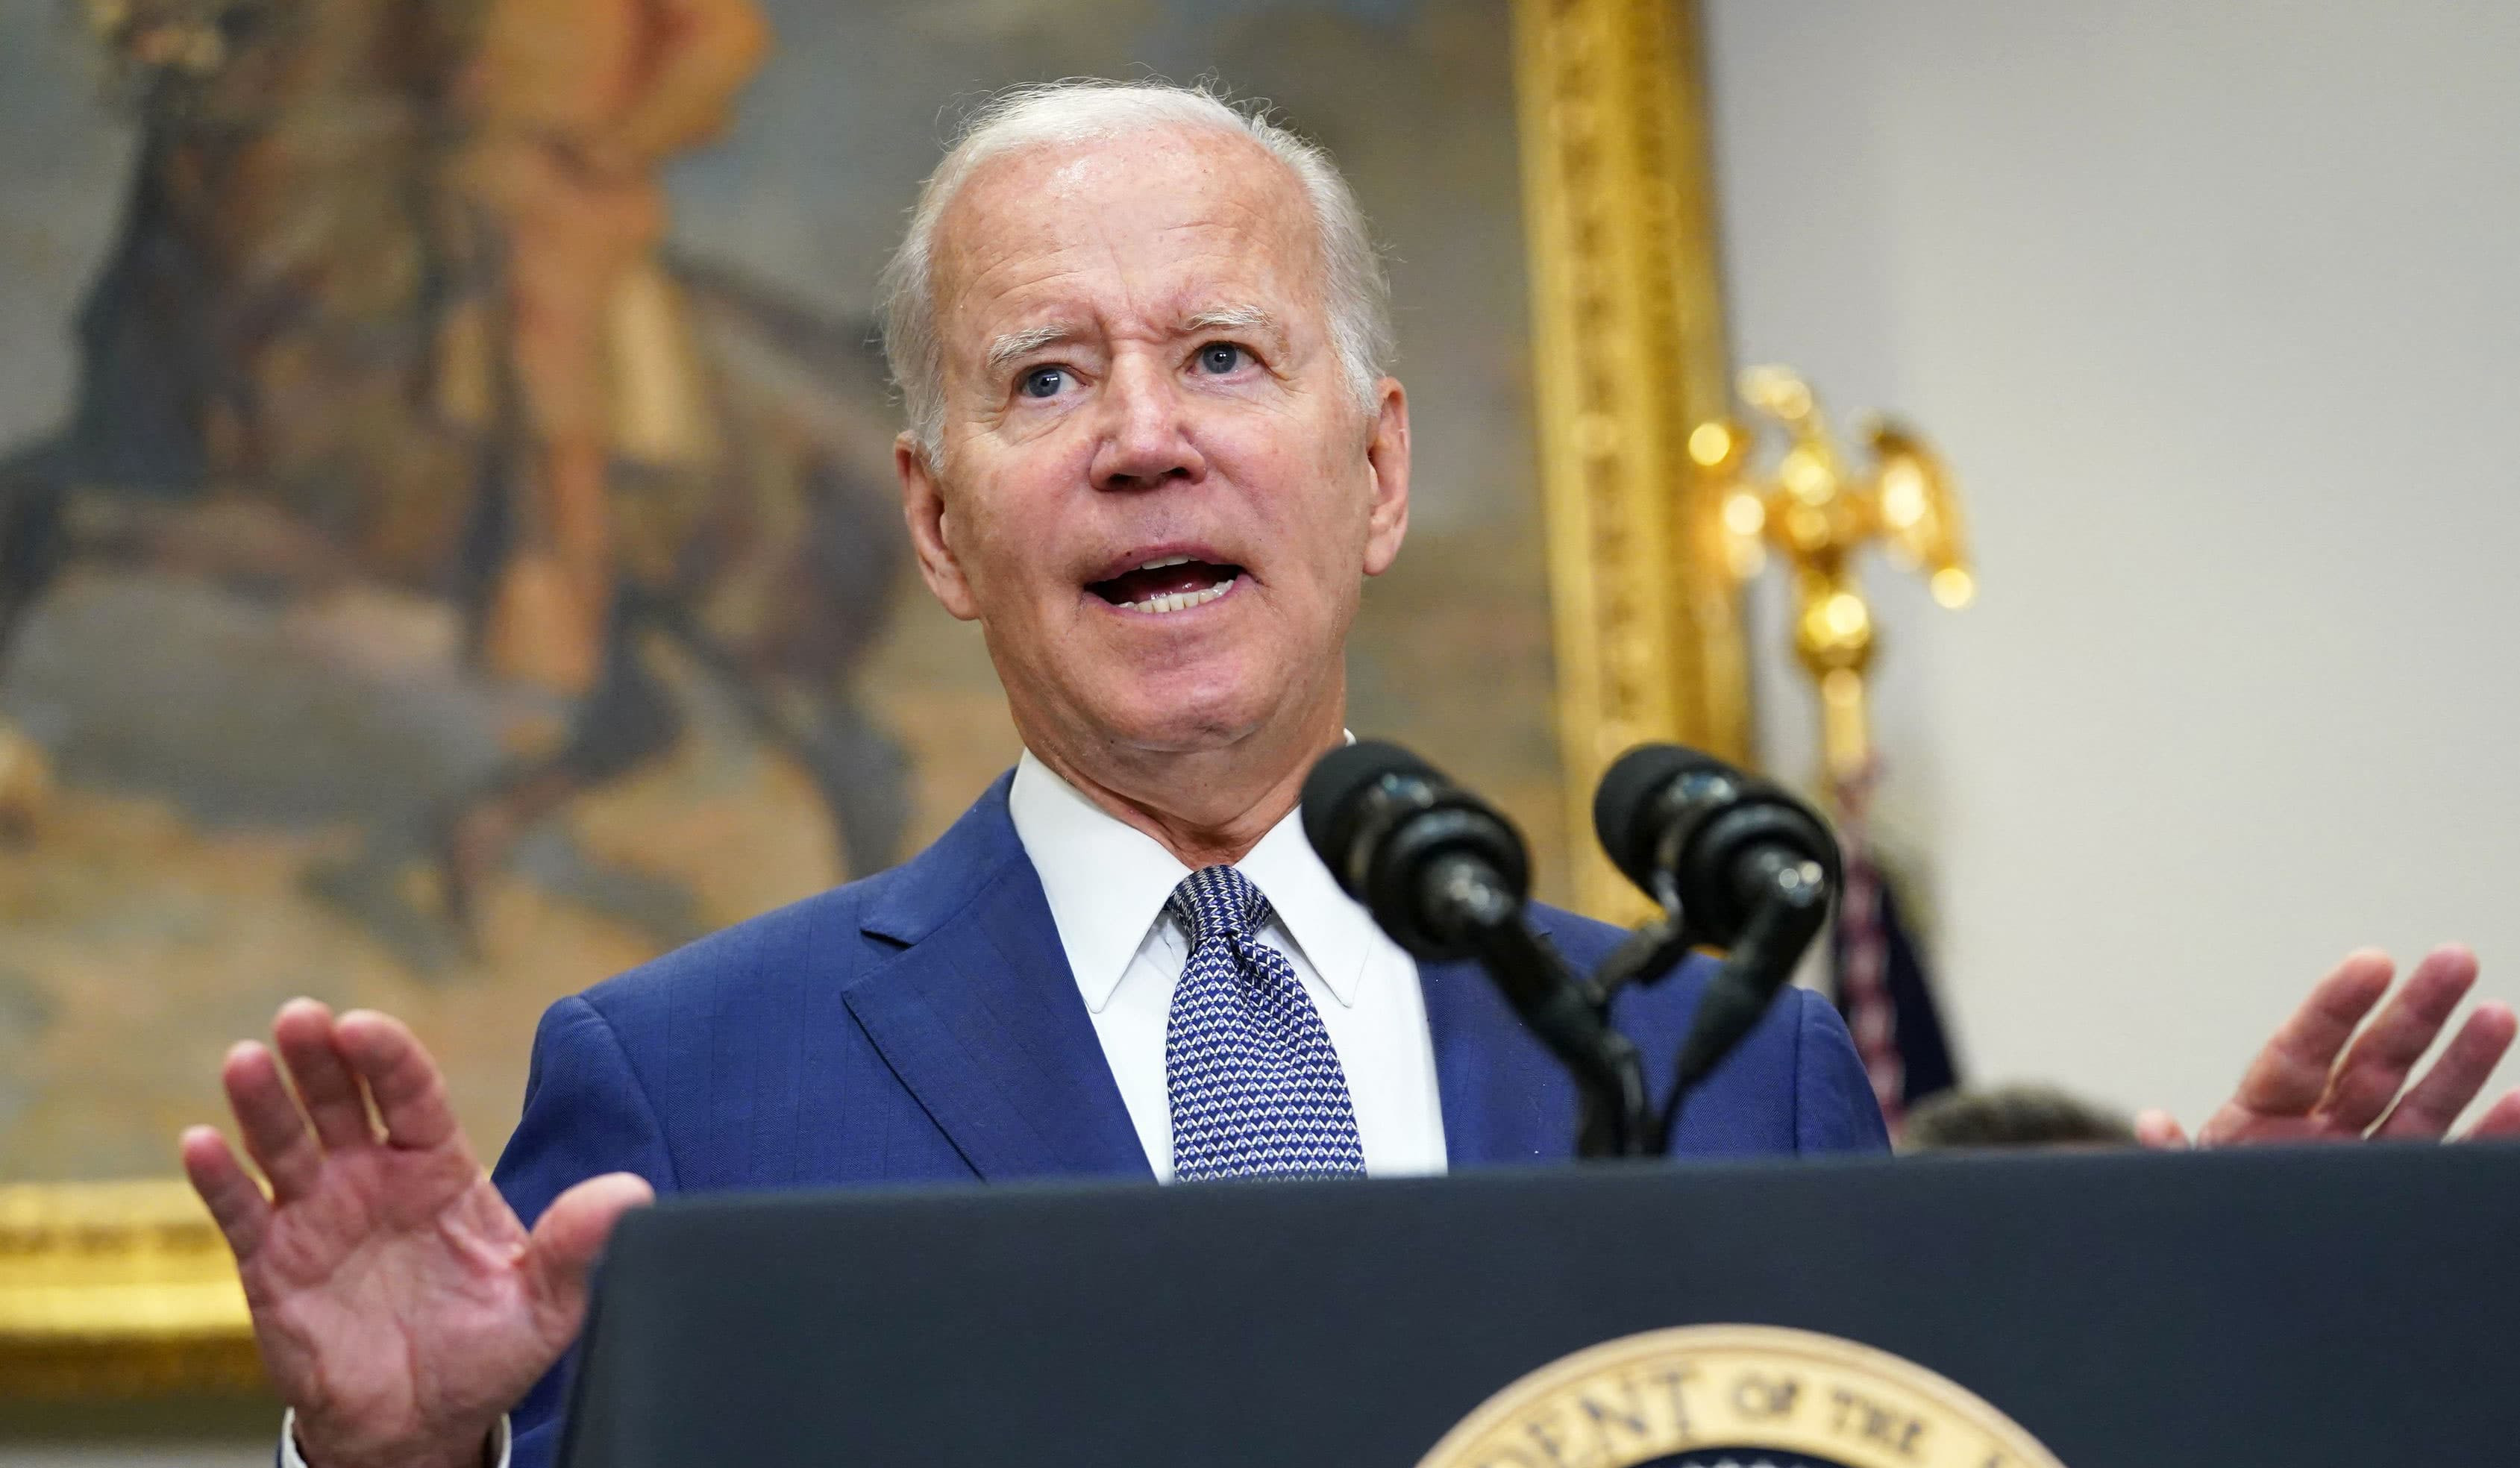 Biden says he doesn’t expect drastic moves from China on Taiwan